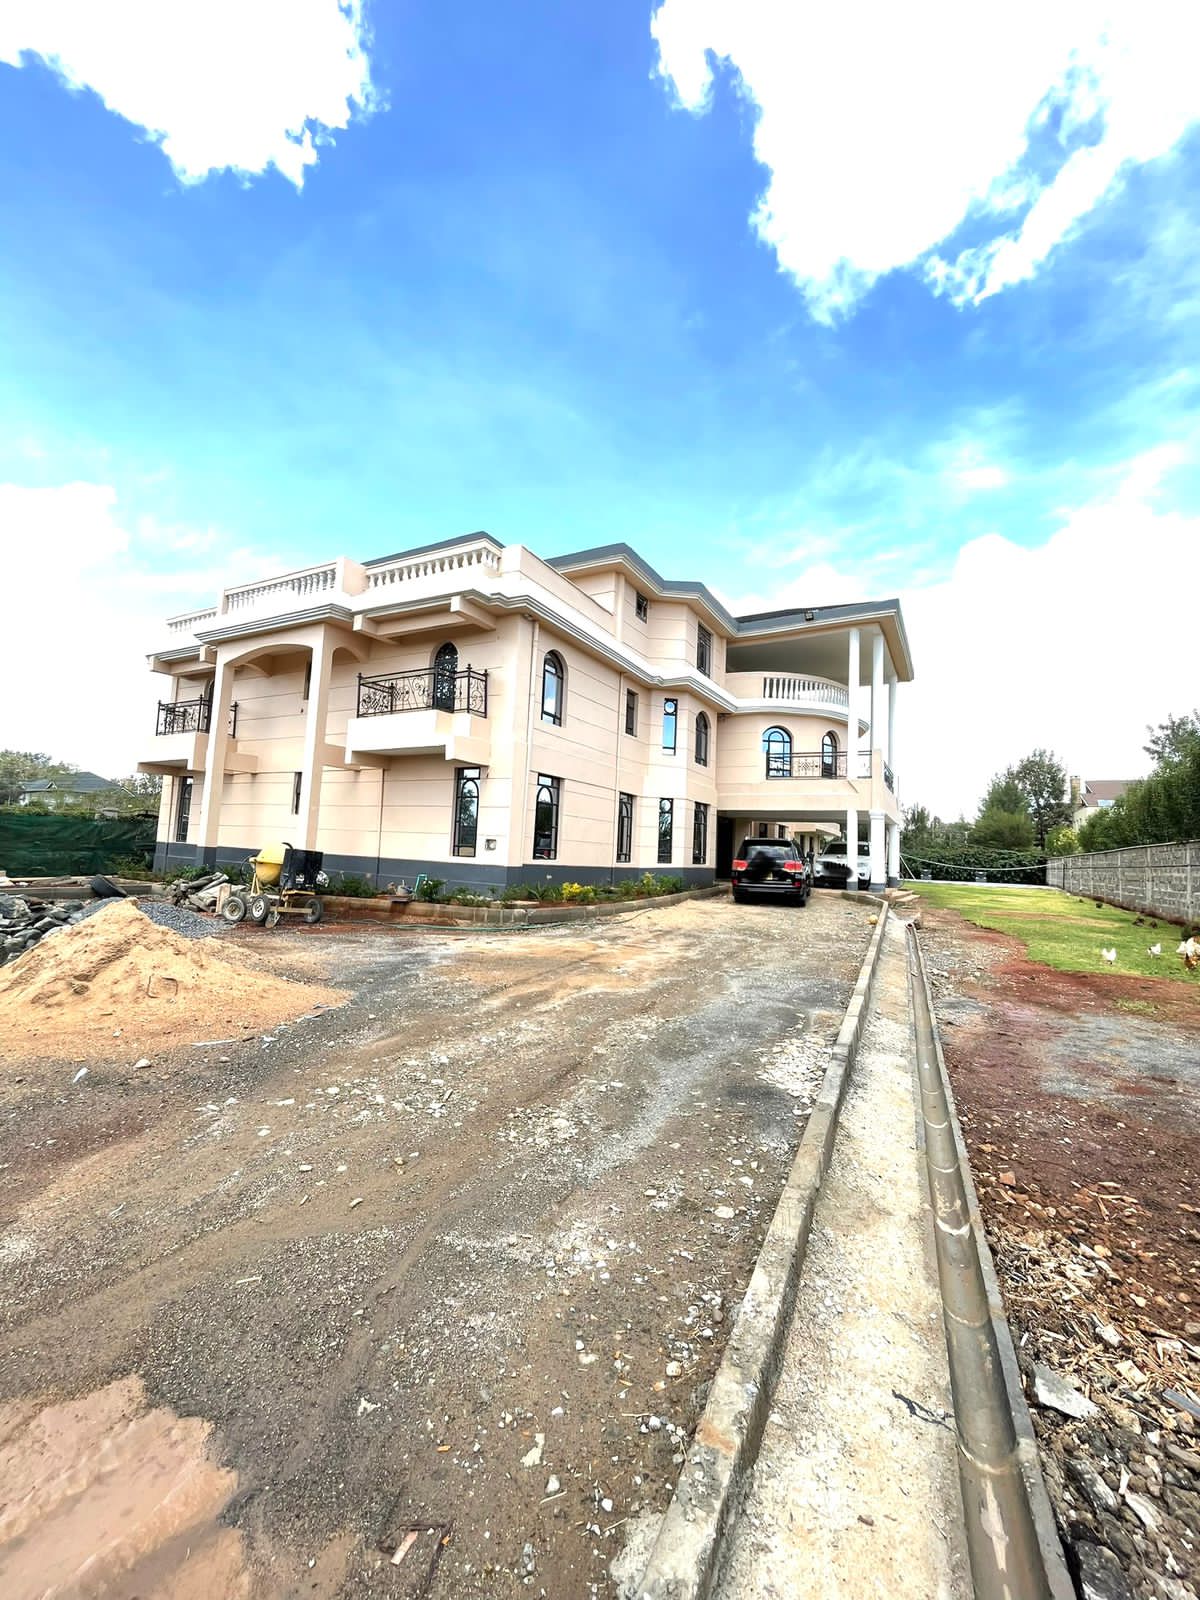 AMBASSADORIAL HOME FOR SALE IN KAREN NEAR HILL CREST SCHOOL. sitted on 1/2 acre plot. Has 15 bedrooms. Musilli Homes